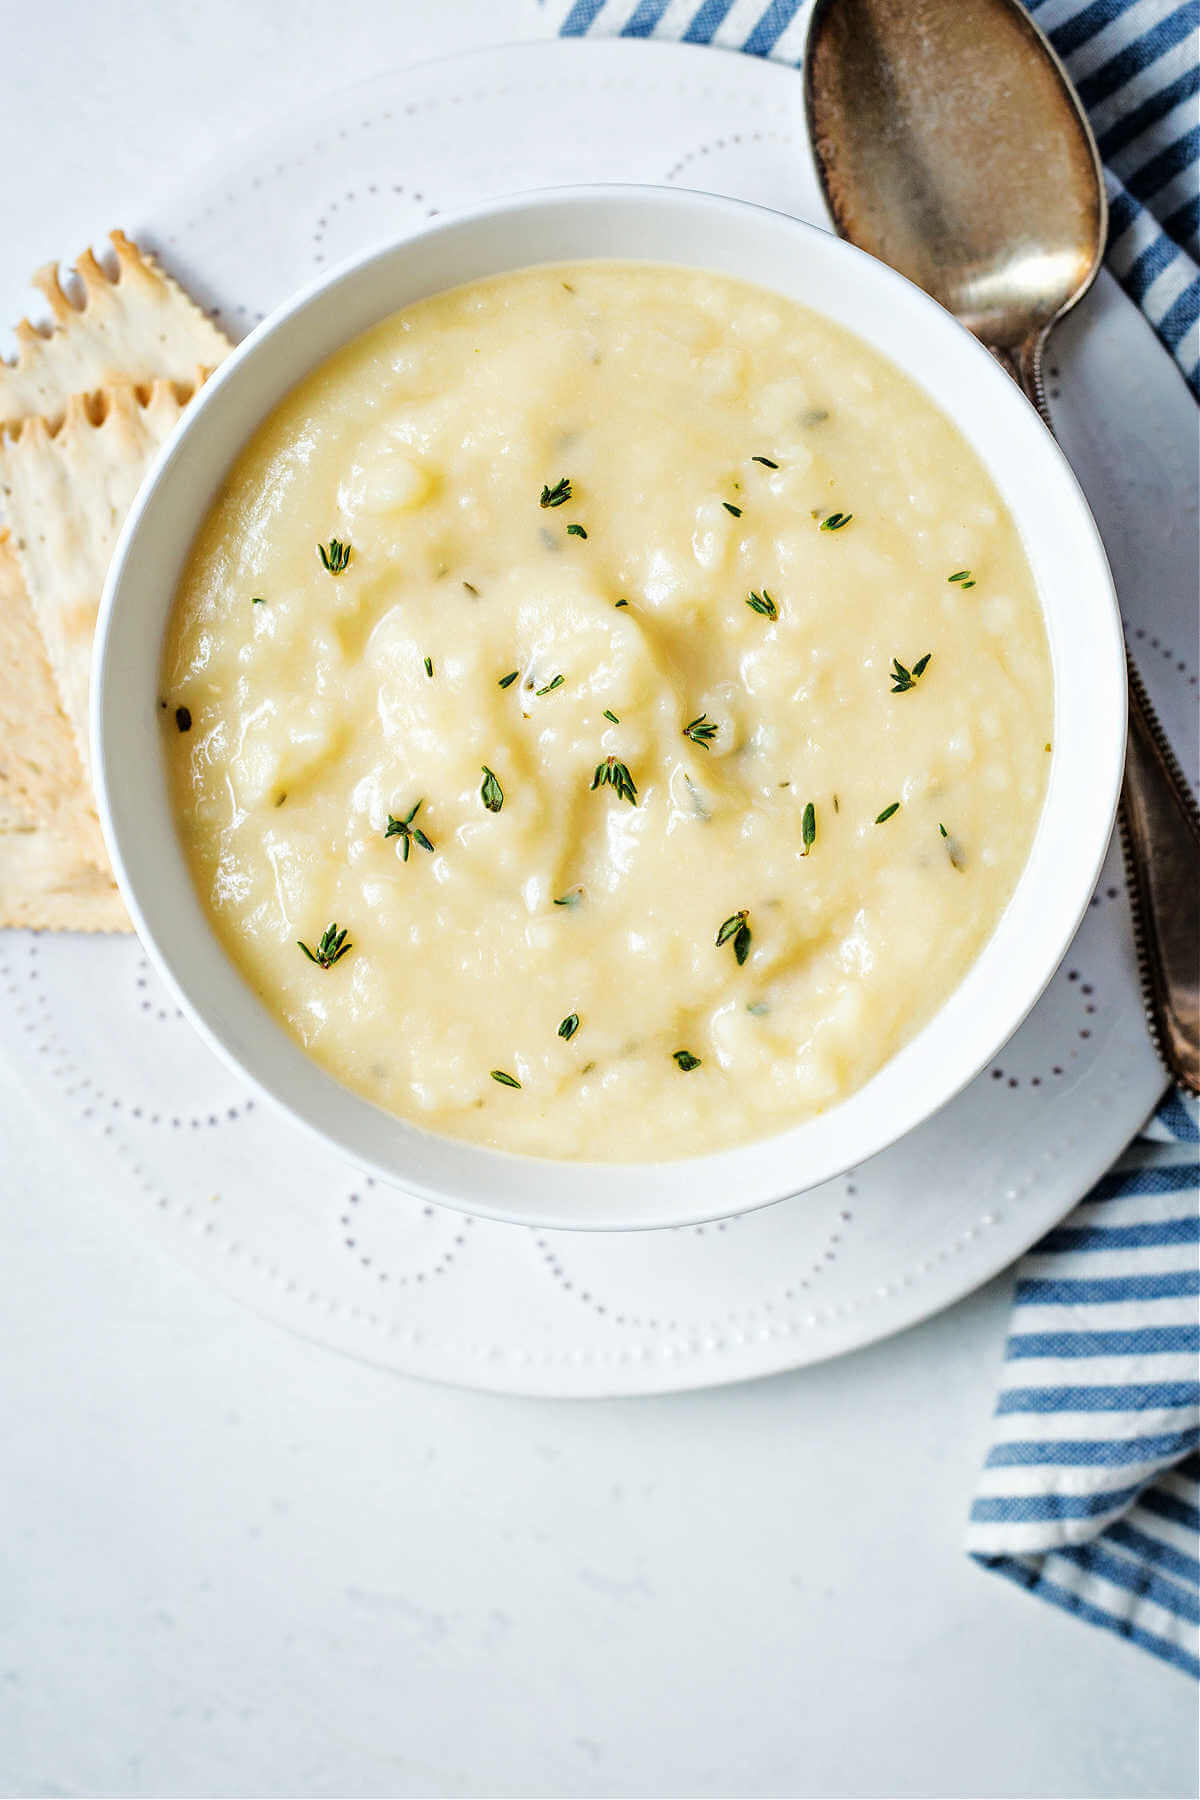 a bowl of potato soup on a white plate with crackers and a spoon to the side and fresh thyme leaves sprinkled on top.